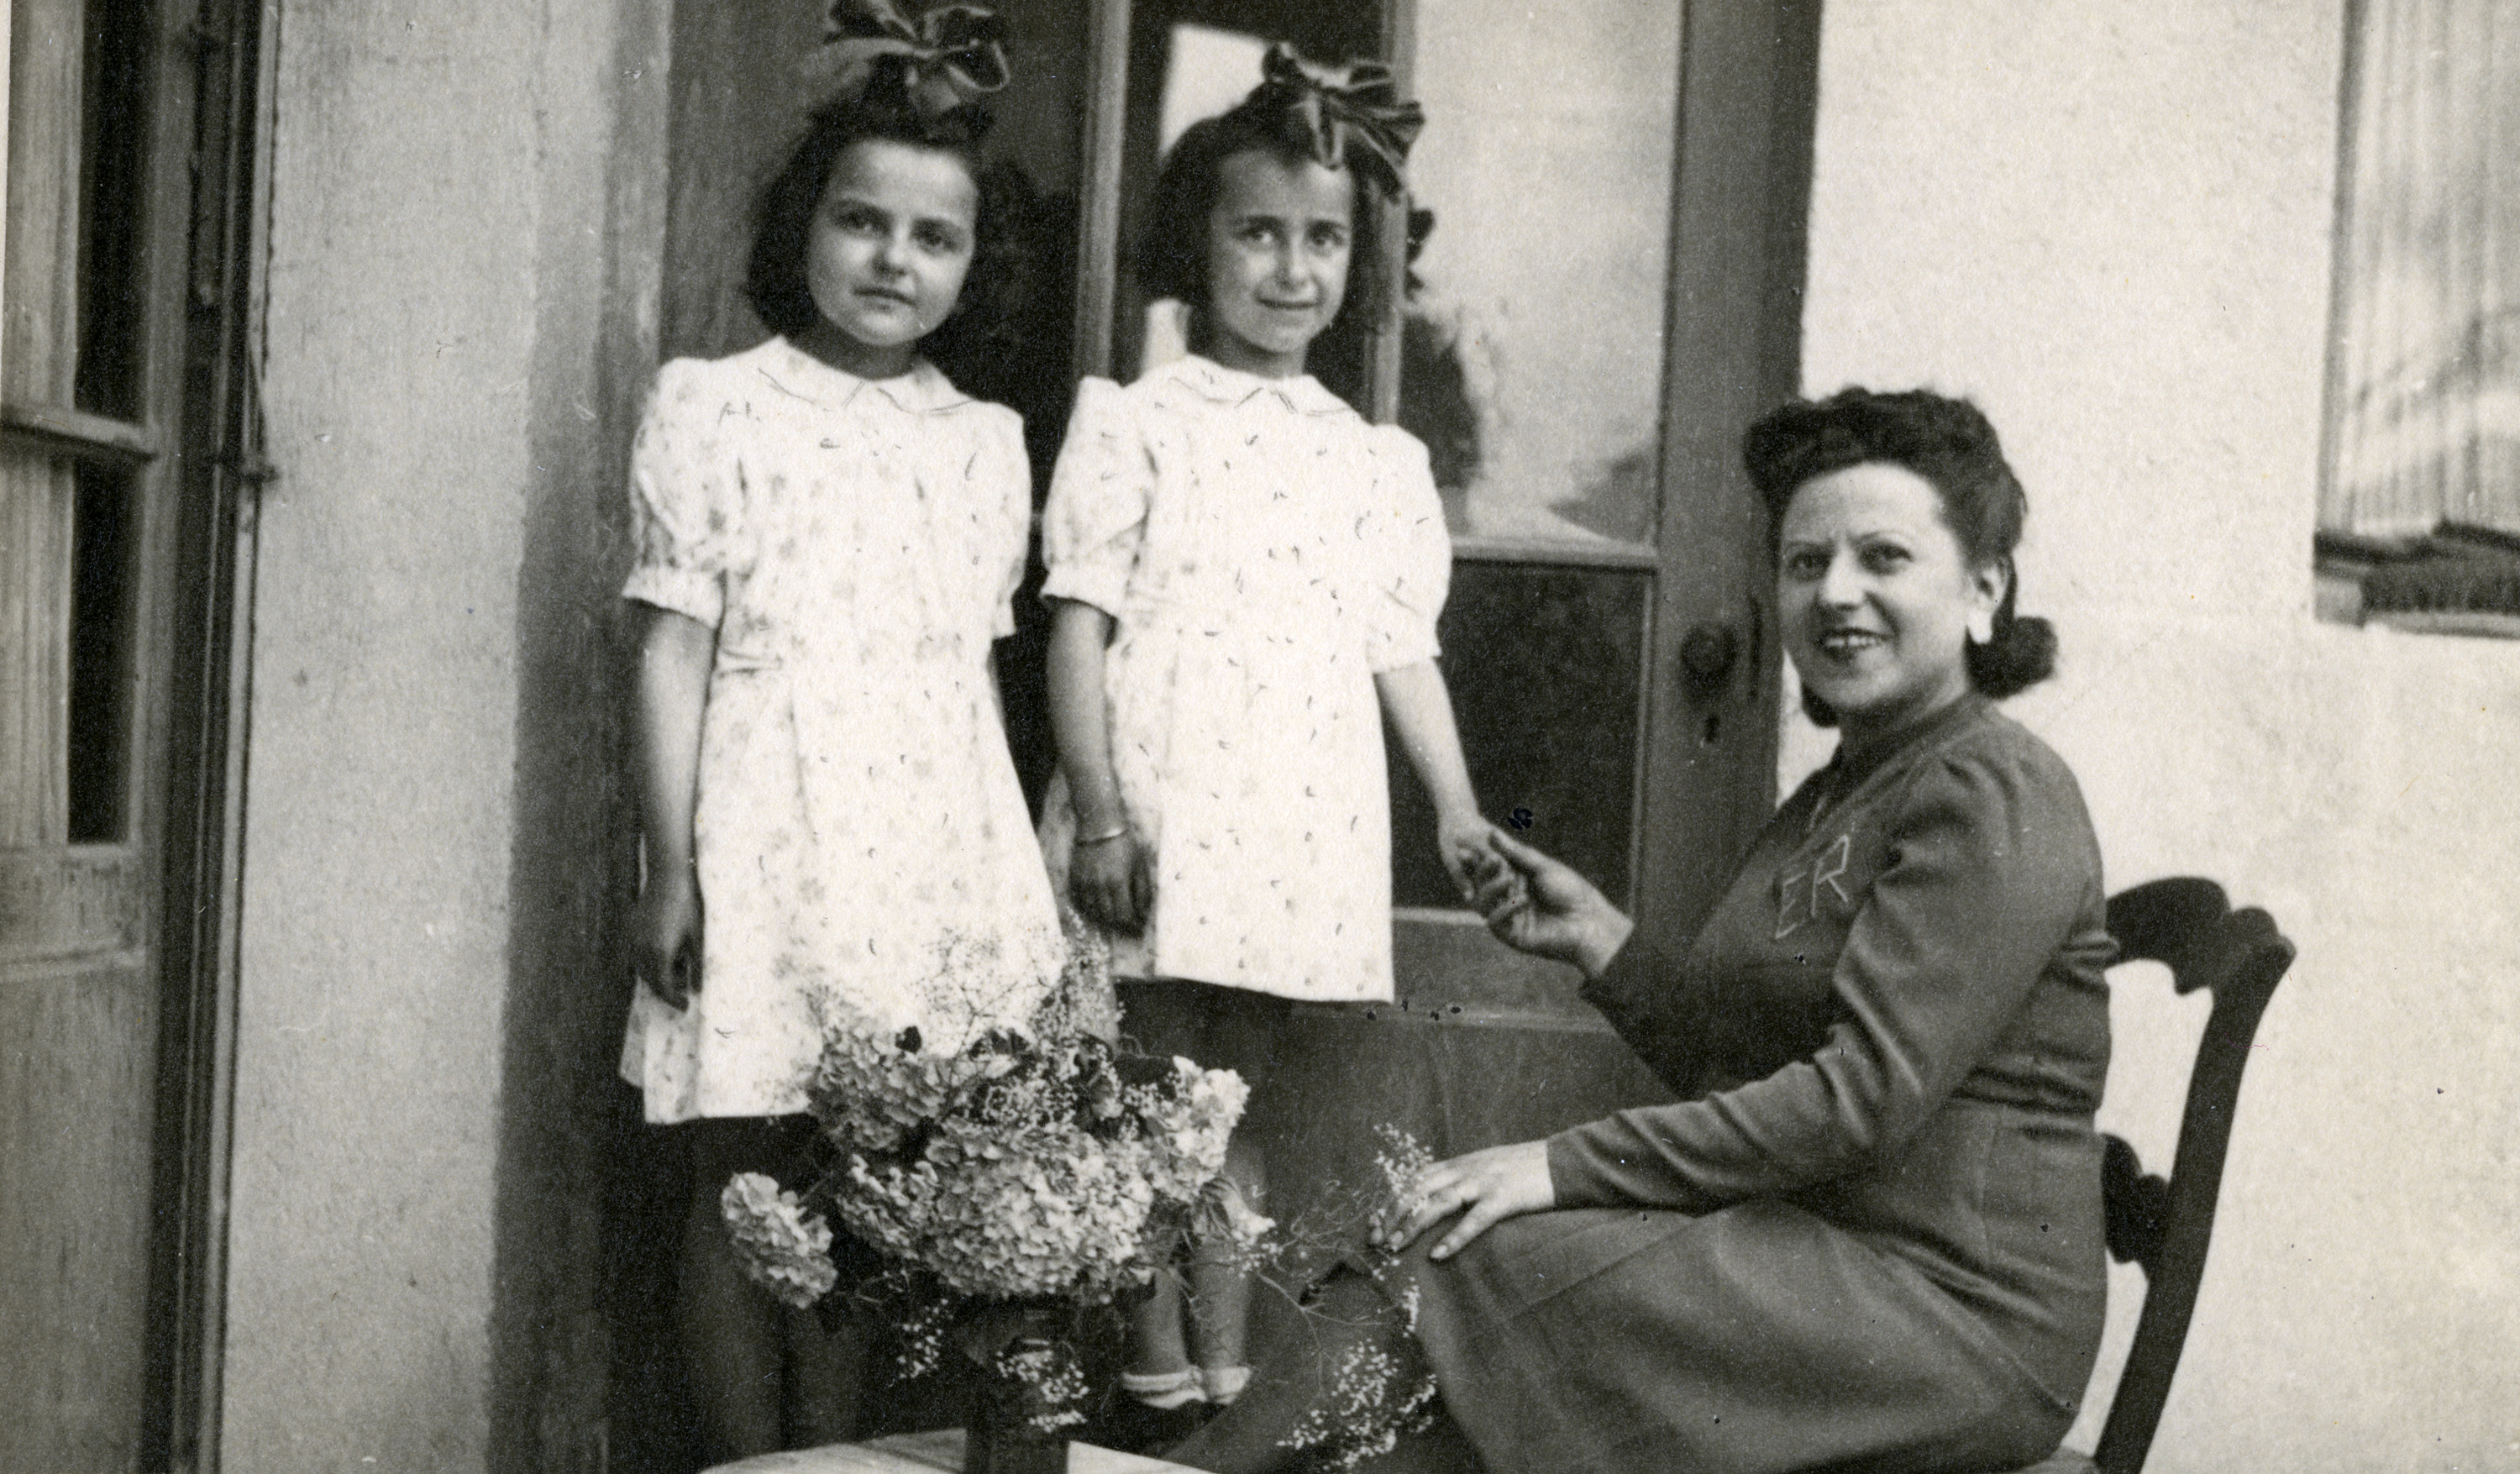 Claire Ridnik, her mother Etla and cousin Aliette pose in their apartment towards the end of the war.